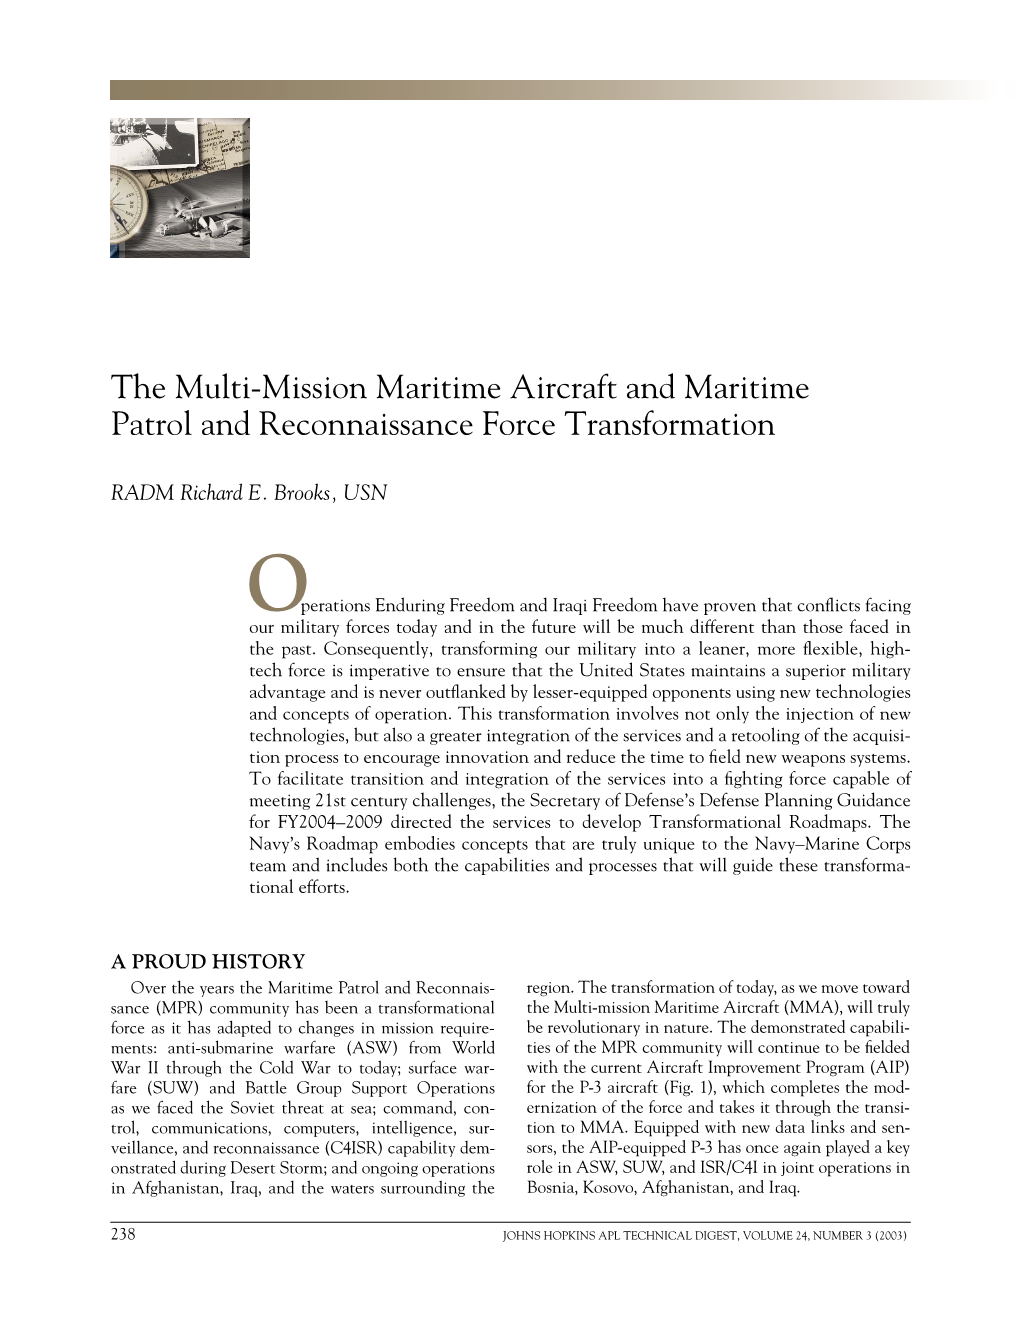 The Multi-Mission Maritime Aircraft and Maritime Patrol and Reconnaissance Force Transformation